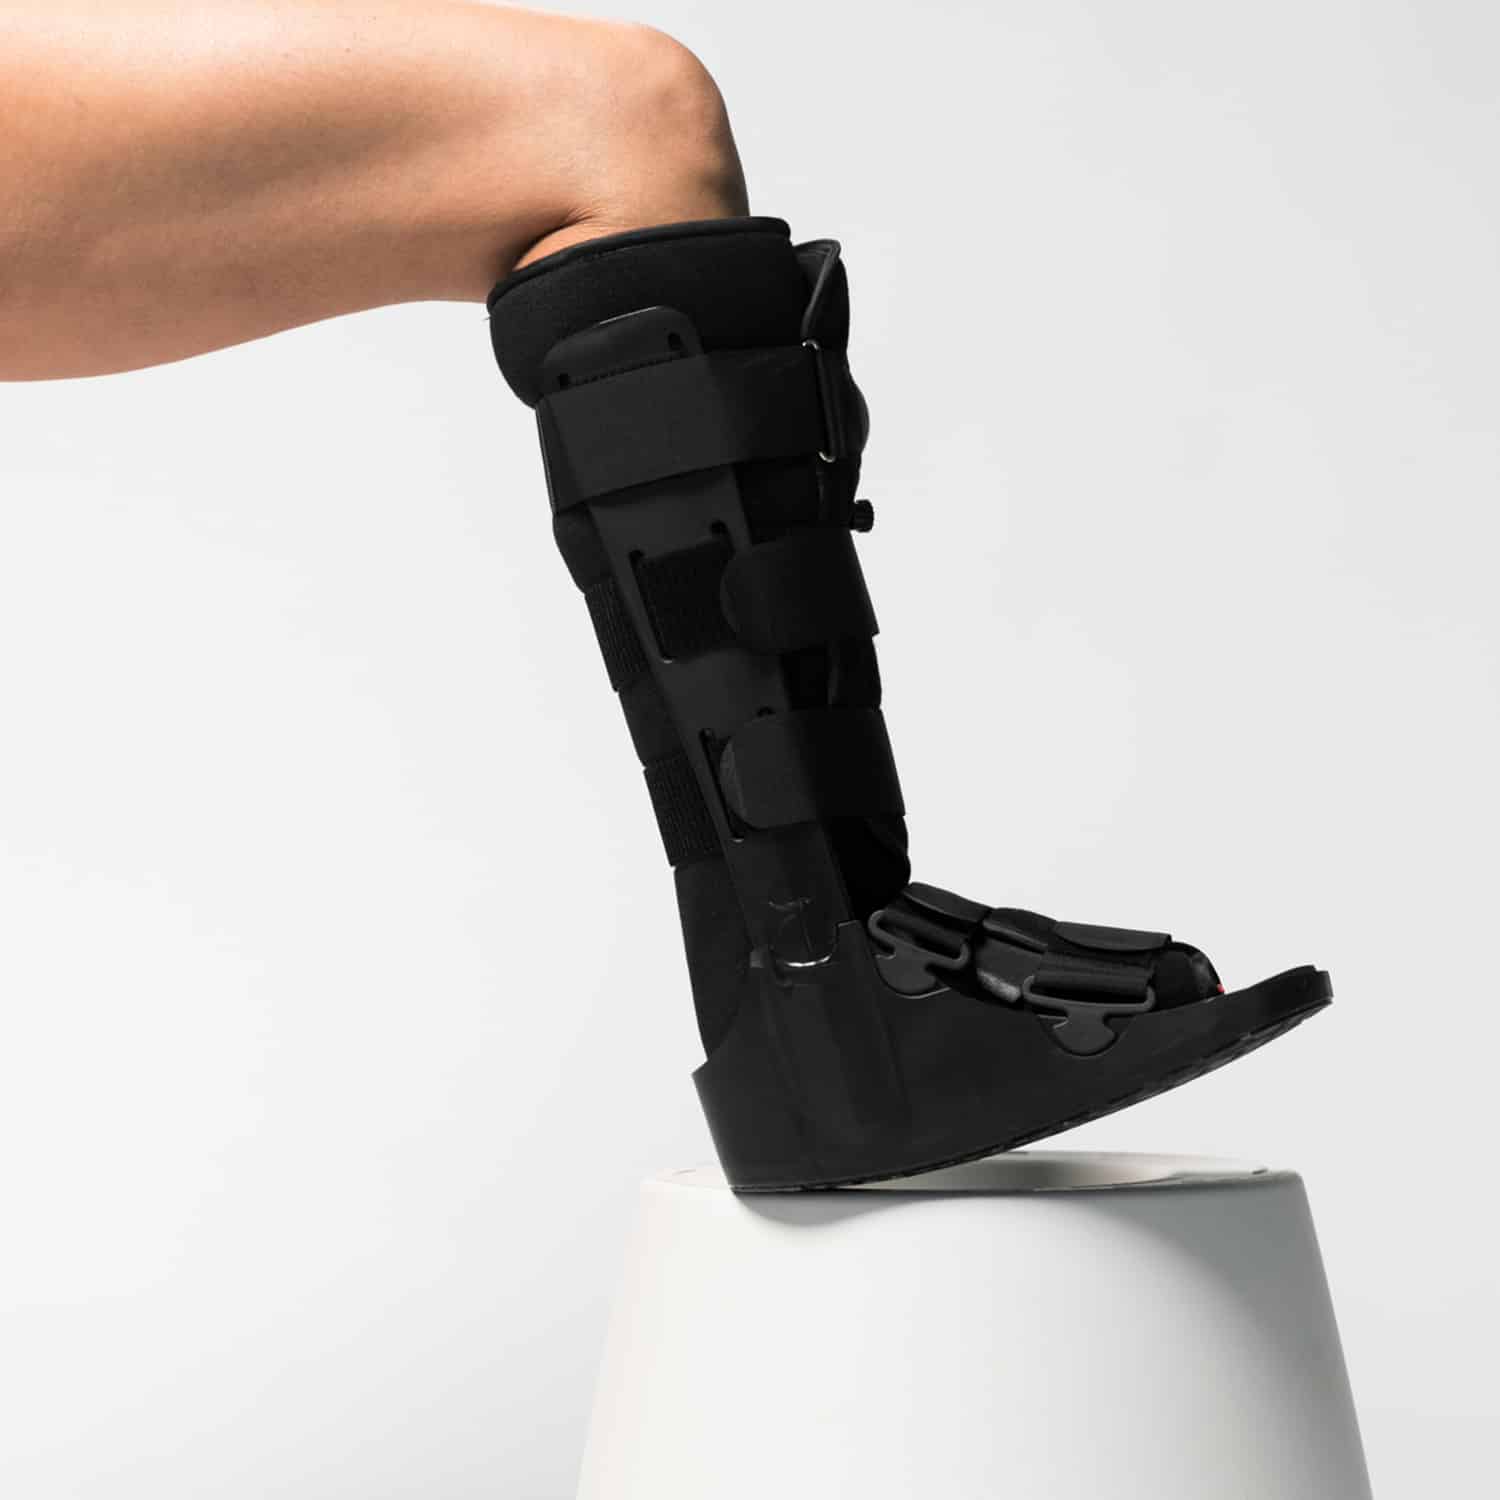 A woman wearing an AIRFLOWTM BOOT Tall on top of a stool.